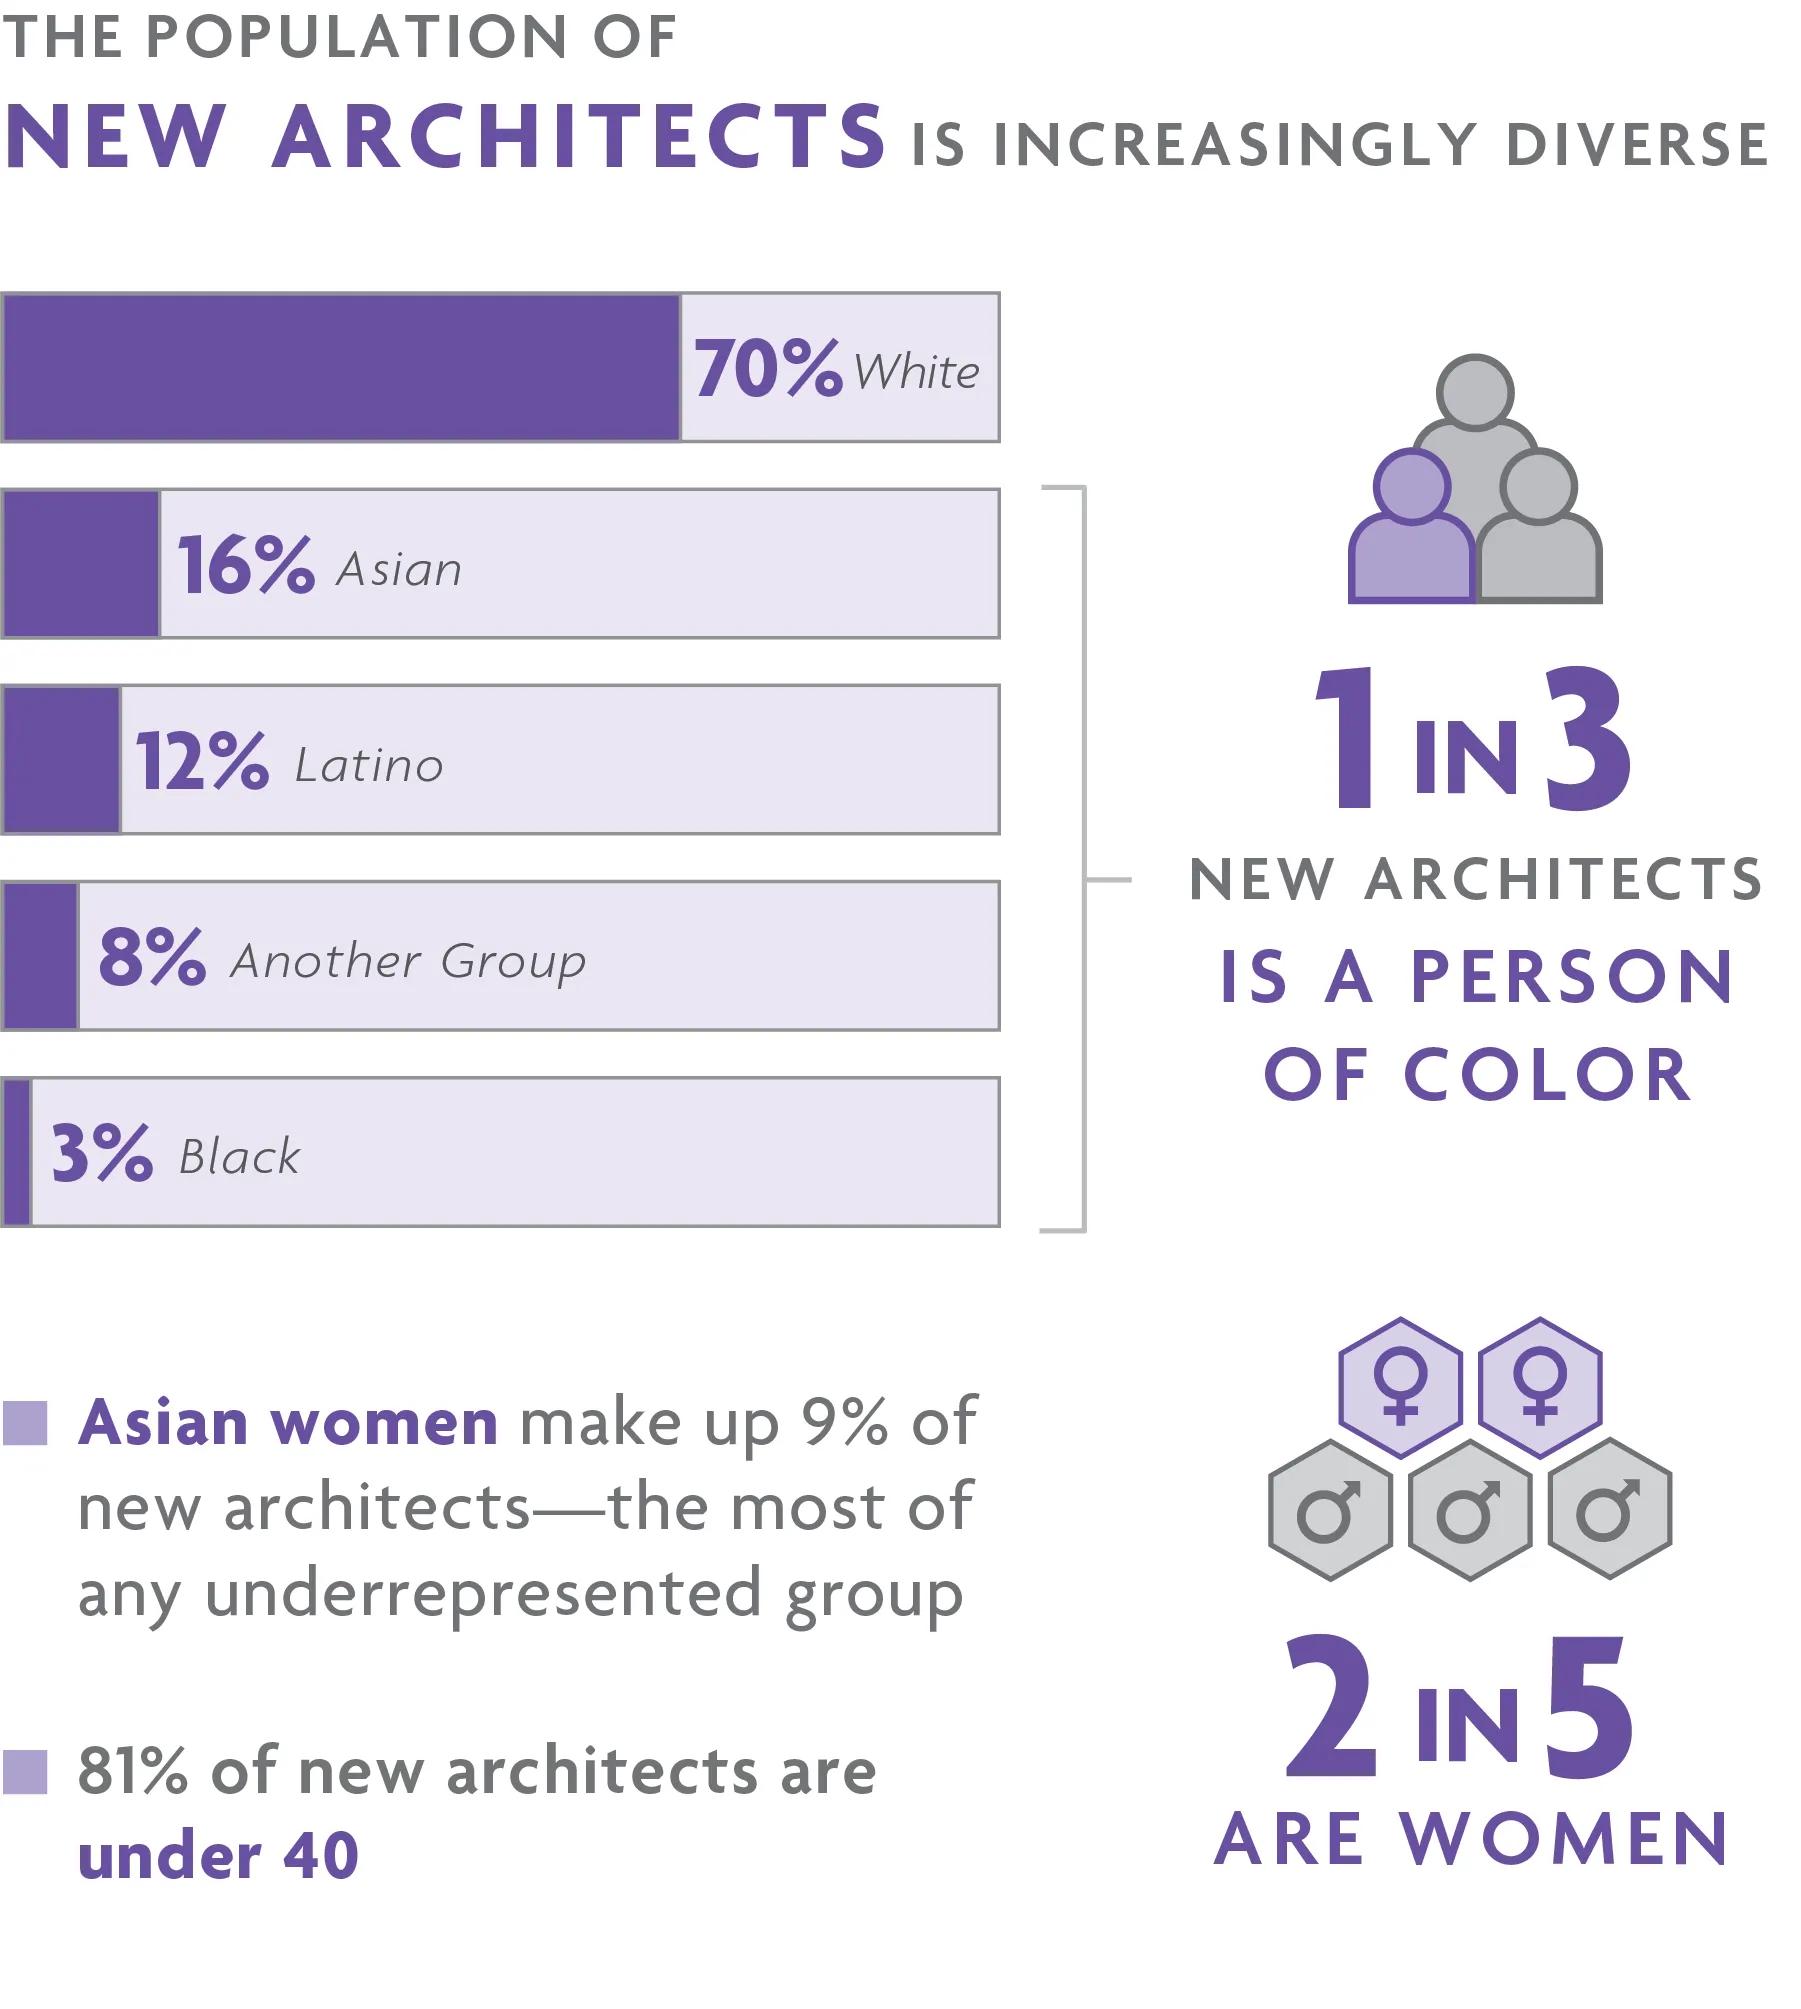 New architects are increasingly diverse—more than 40% are women and 1 in 3 identify as a person of color. For help with data accessibility, contact communications@ncarb.org.